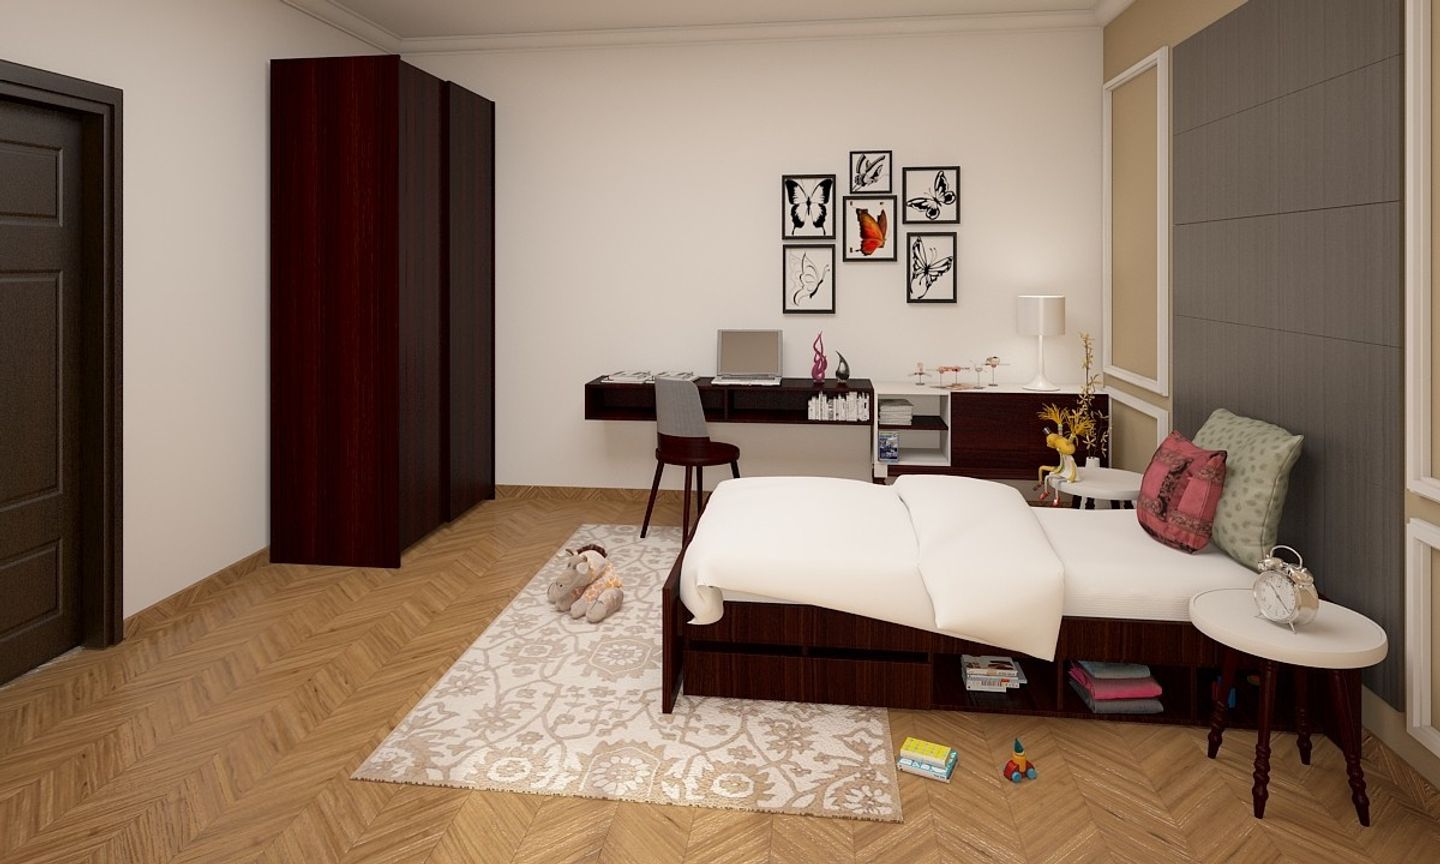 Contemporary Kids Bedroom Design With Dark Wooden Furnishing